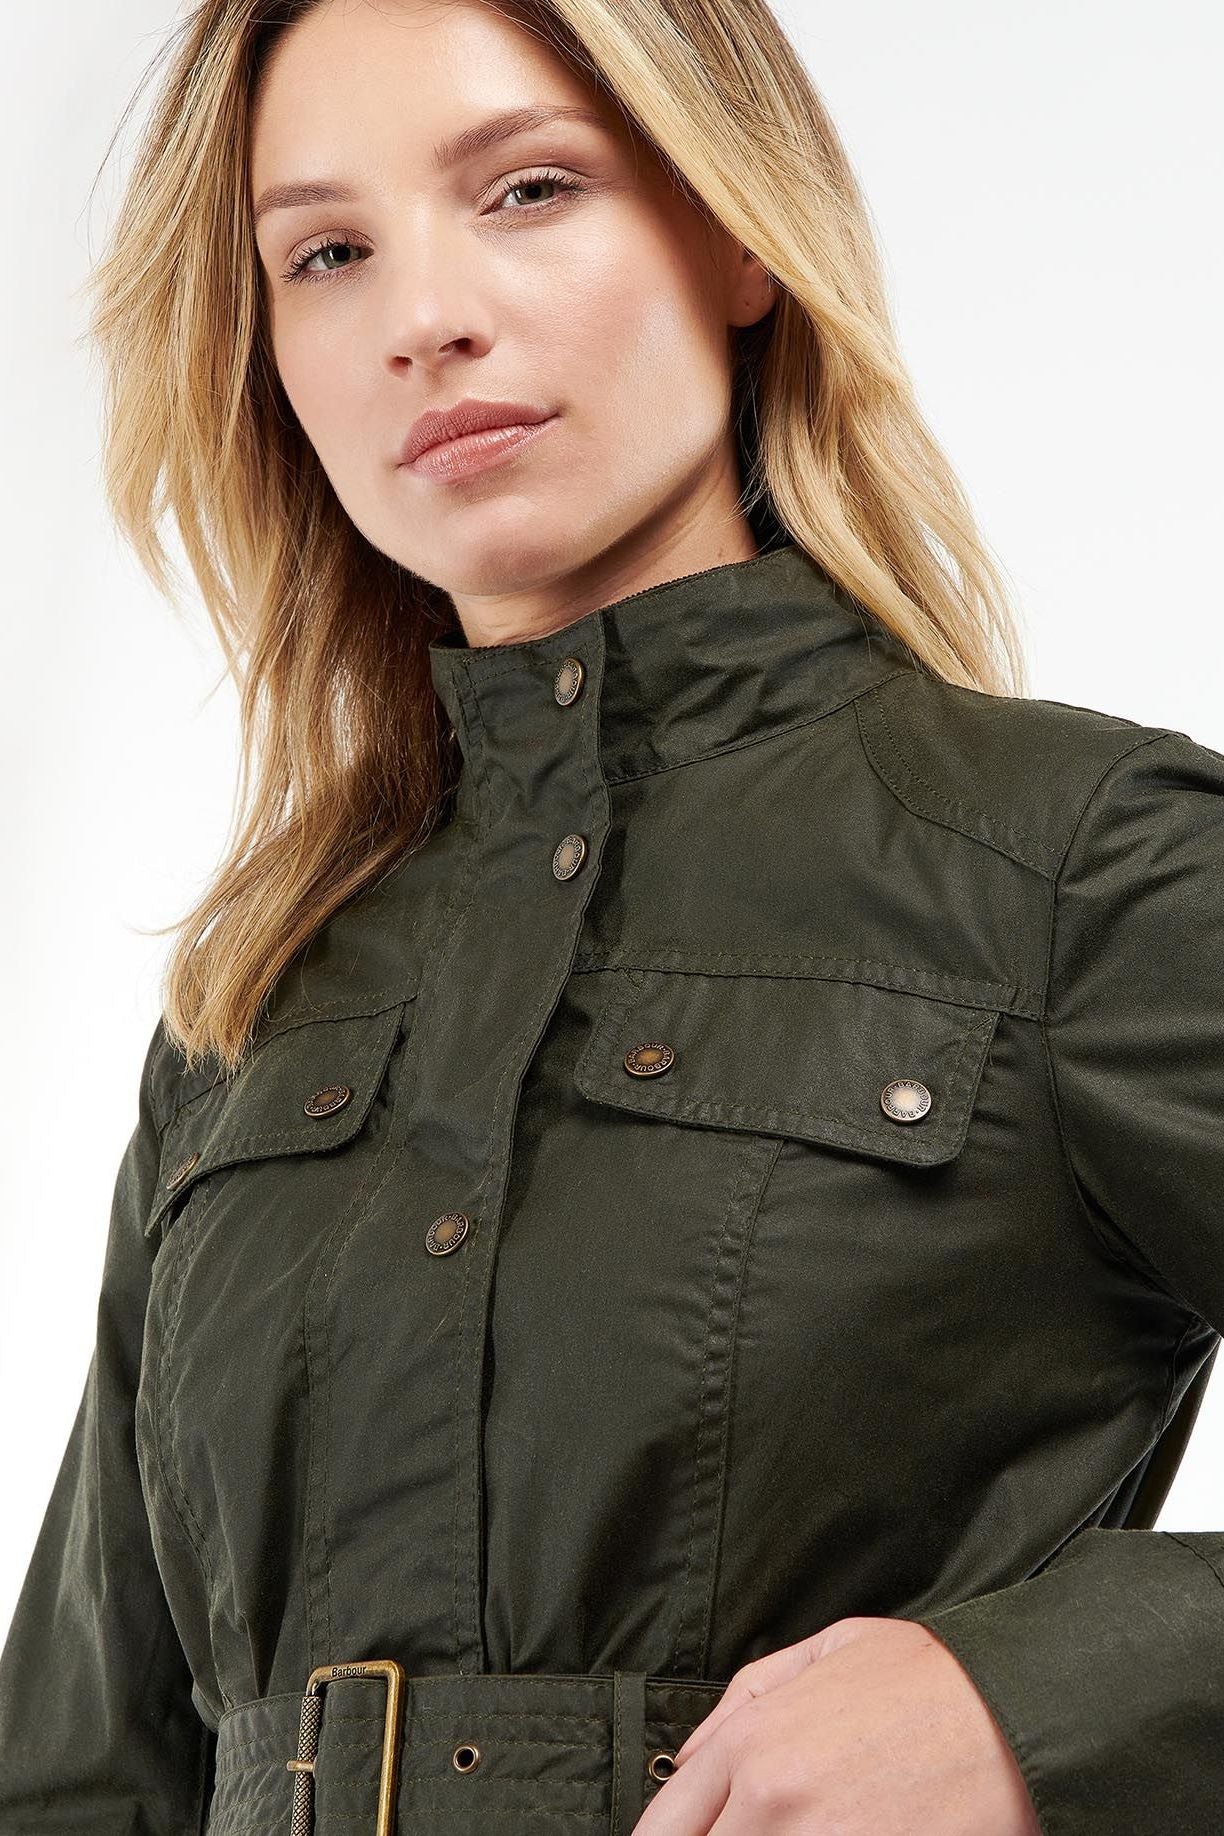 Barbour Alena new wax jacket in Olive LWX1226OL51 – Smyths Country Sports